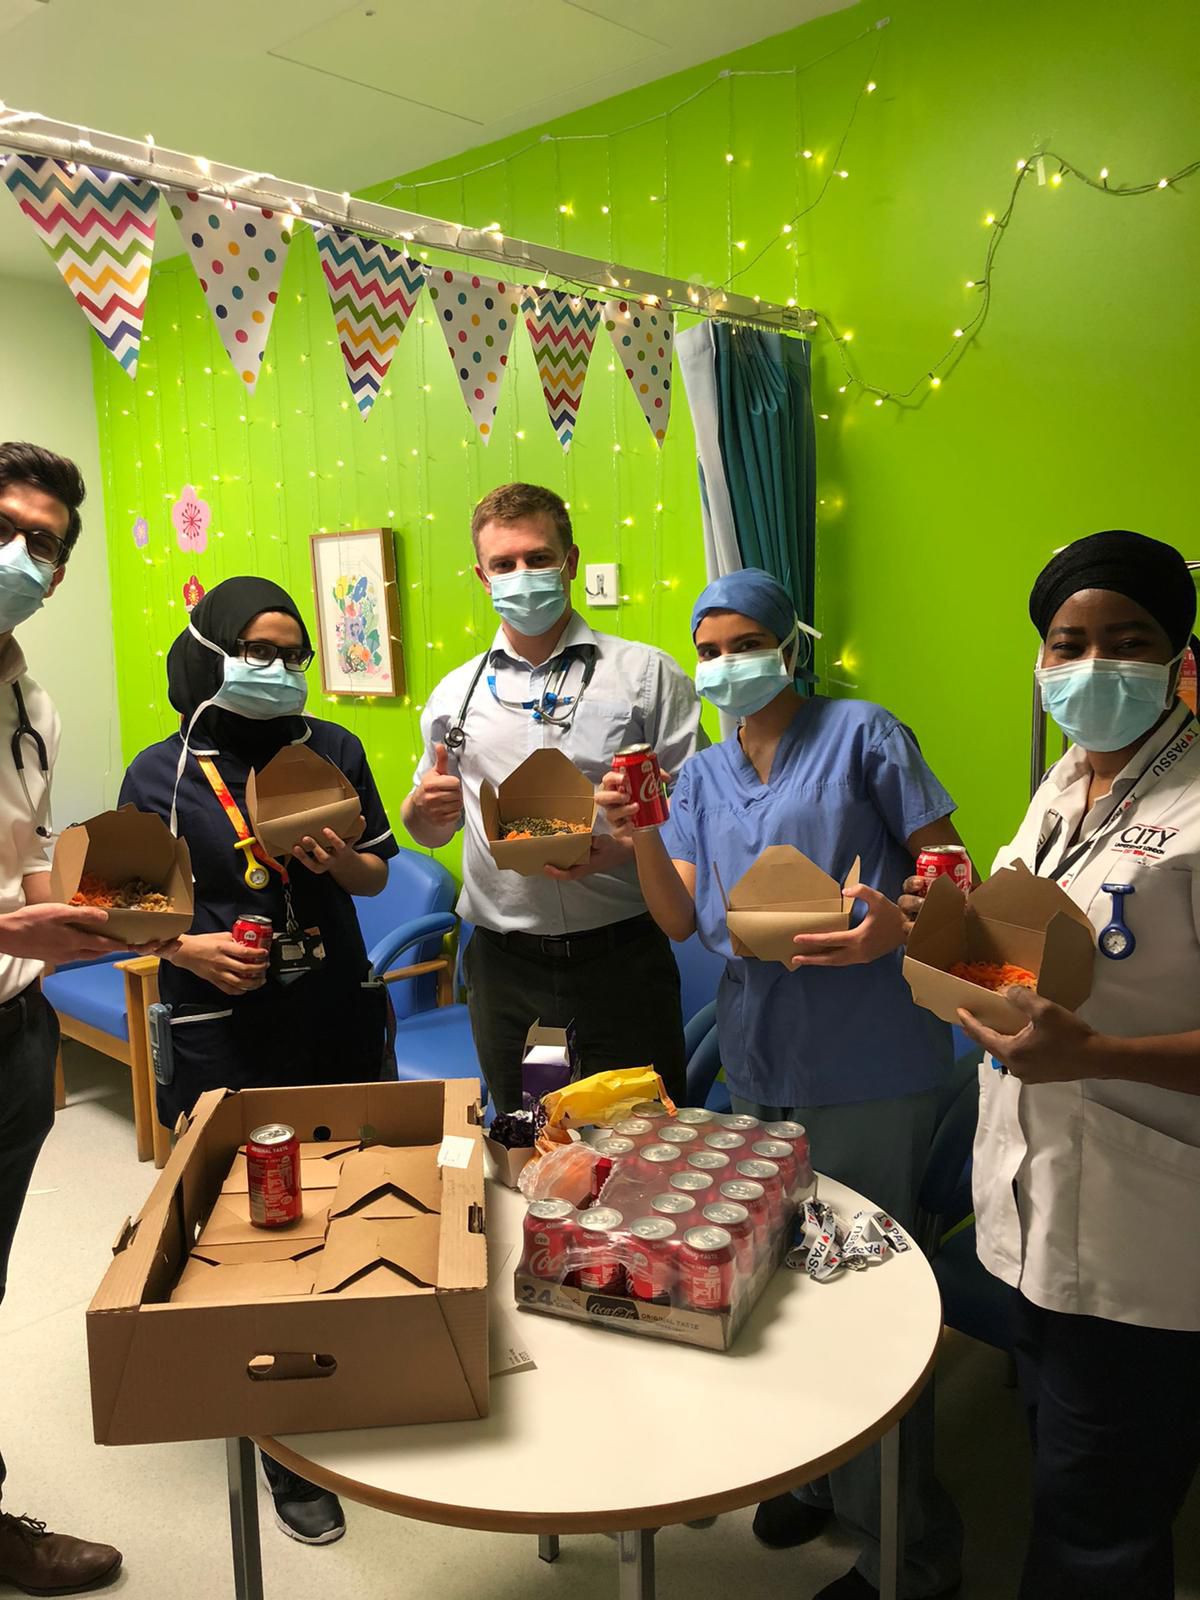 NHS staff receive Deliver Aid meal packages during their shift — meals prepared by some of London’s best chefs 